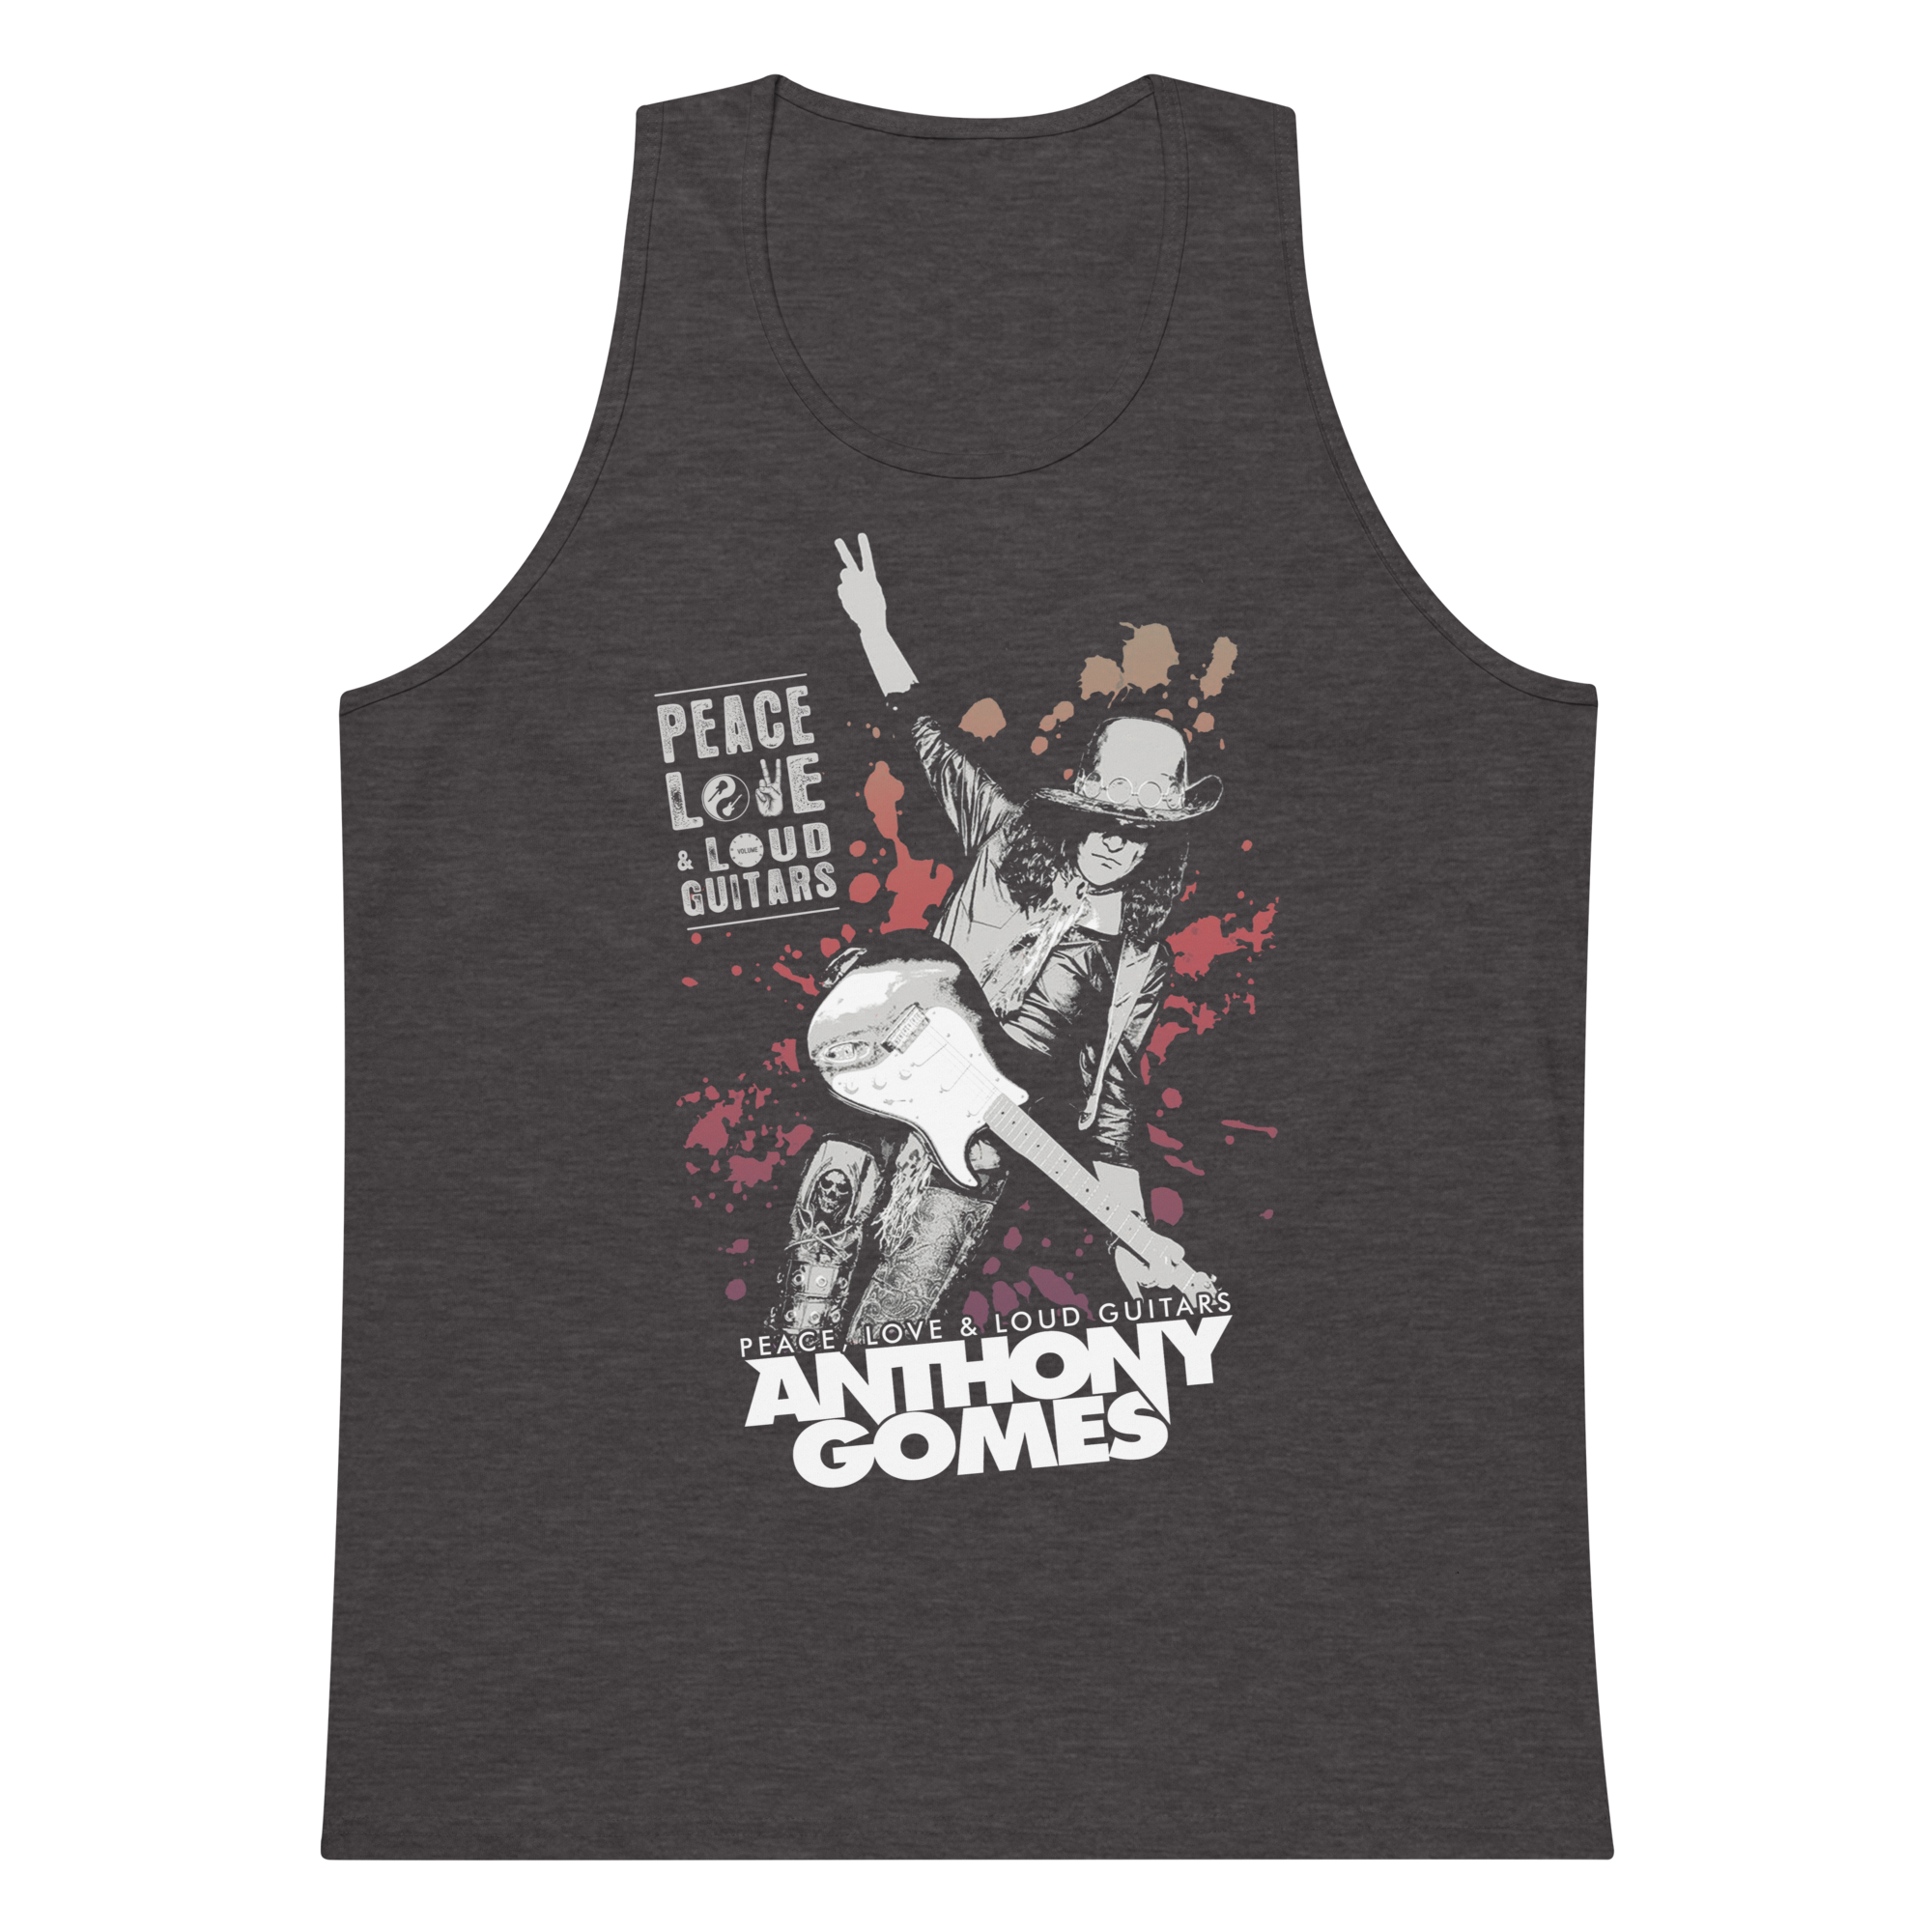 Men’s AG PLLG Tank Top - Available in 4 Colors (S-3XL)